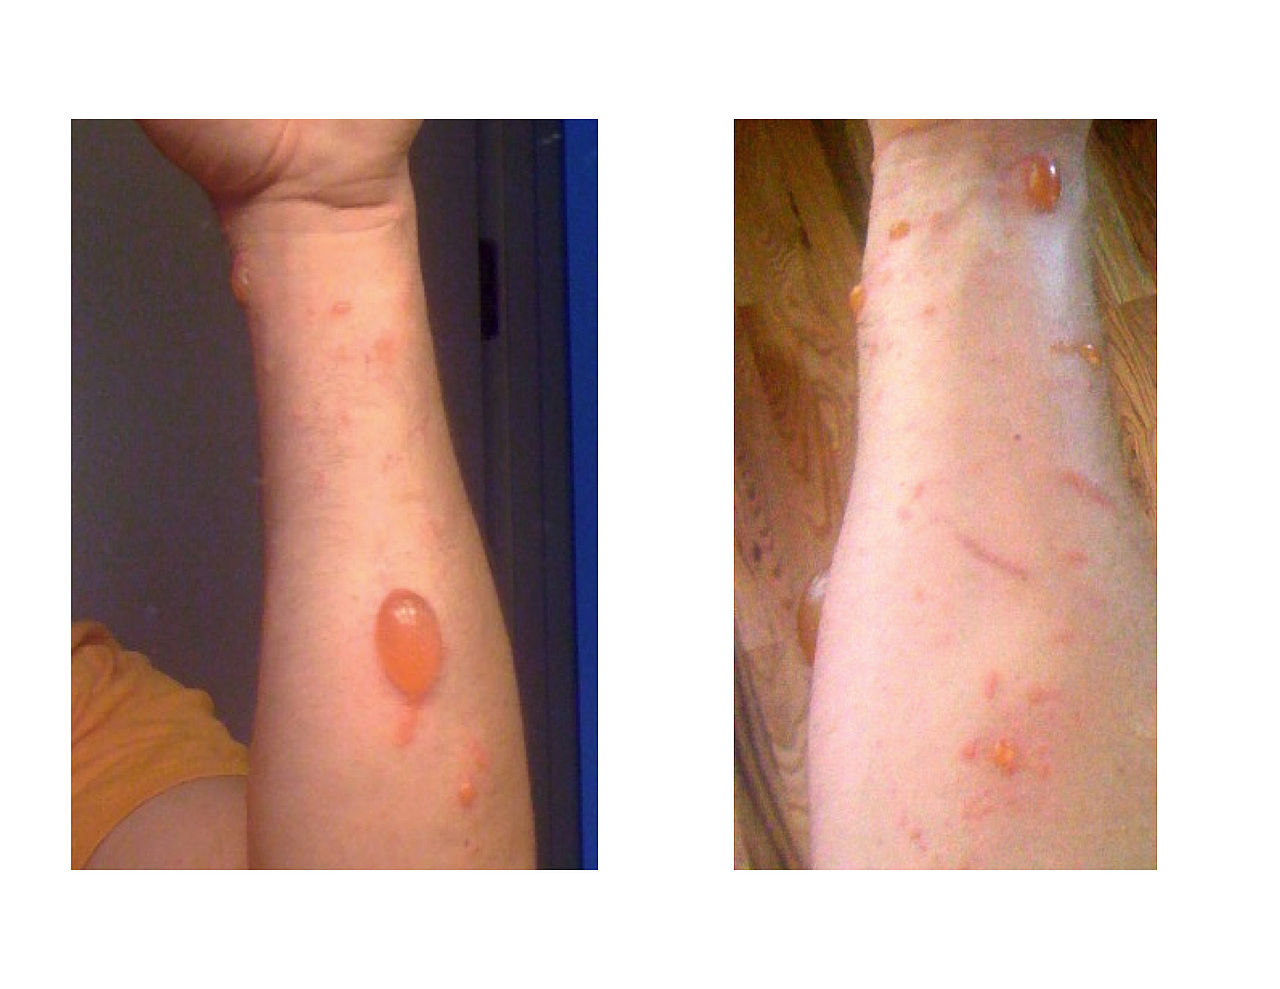 Contact dermatitis on arms after 72 hours of contact with poison ivy.